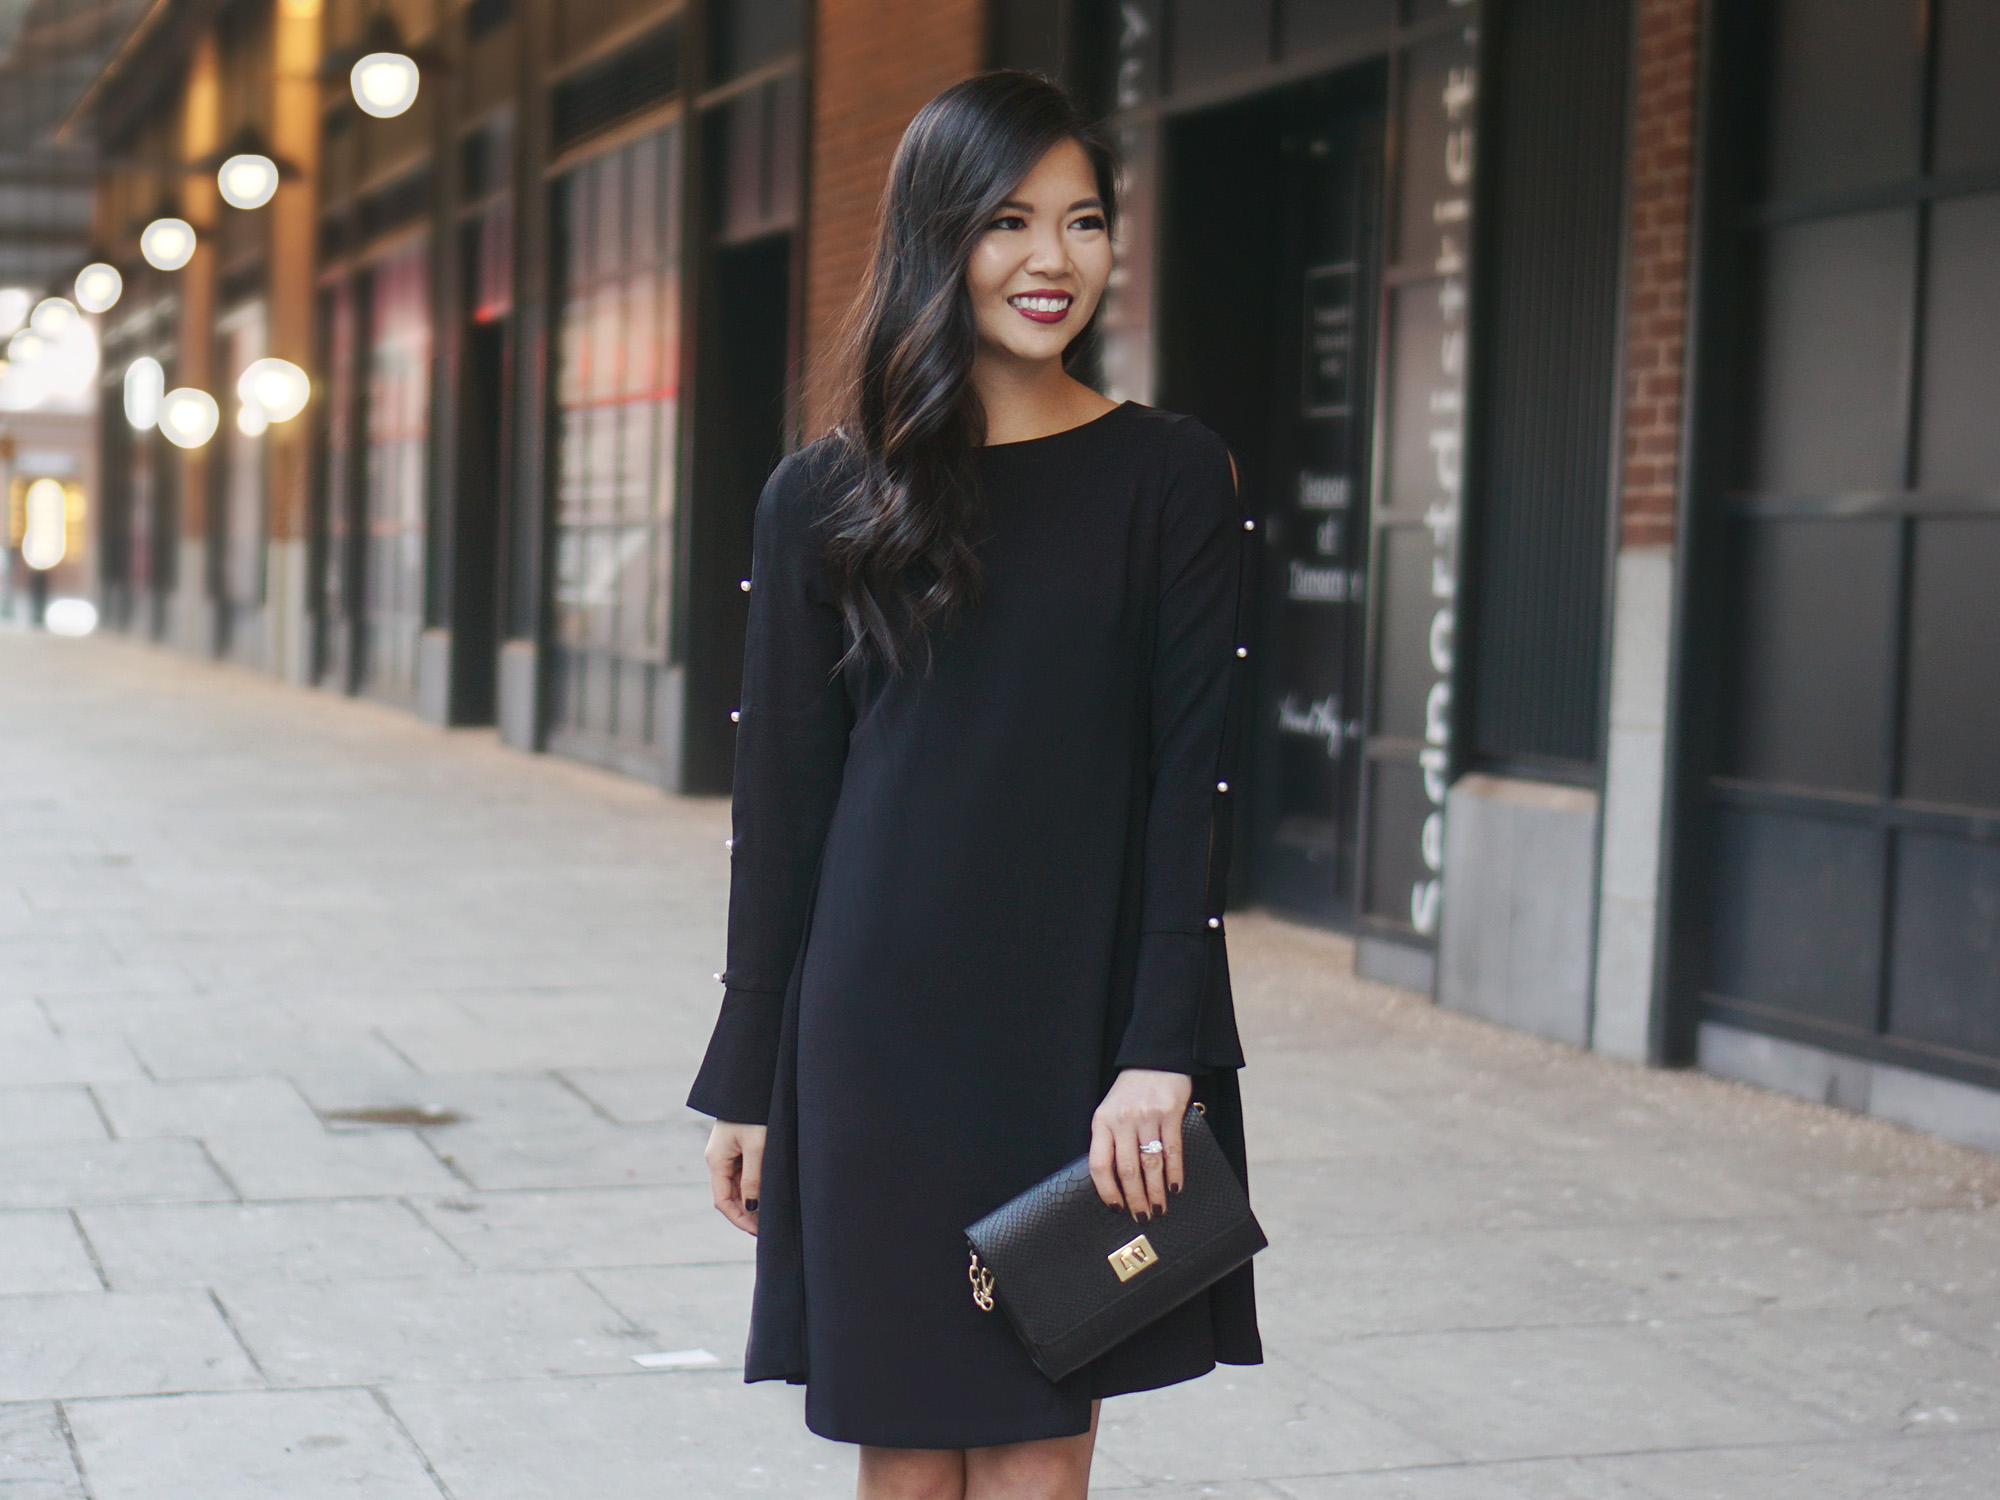 Little Black Dress with Long Sleeves